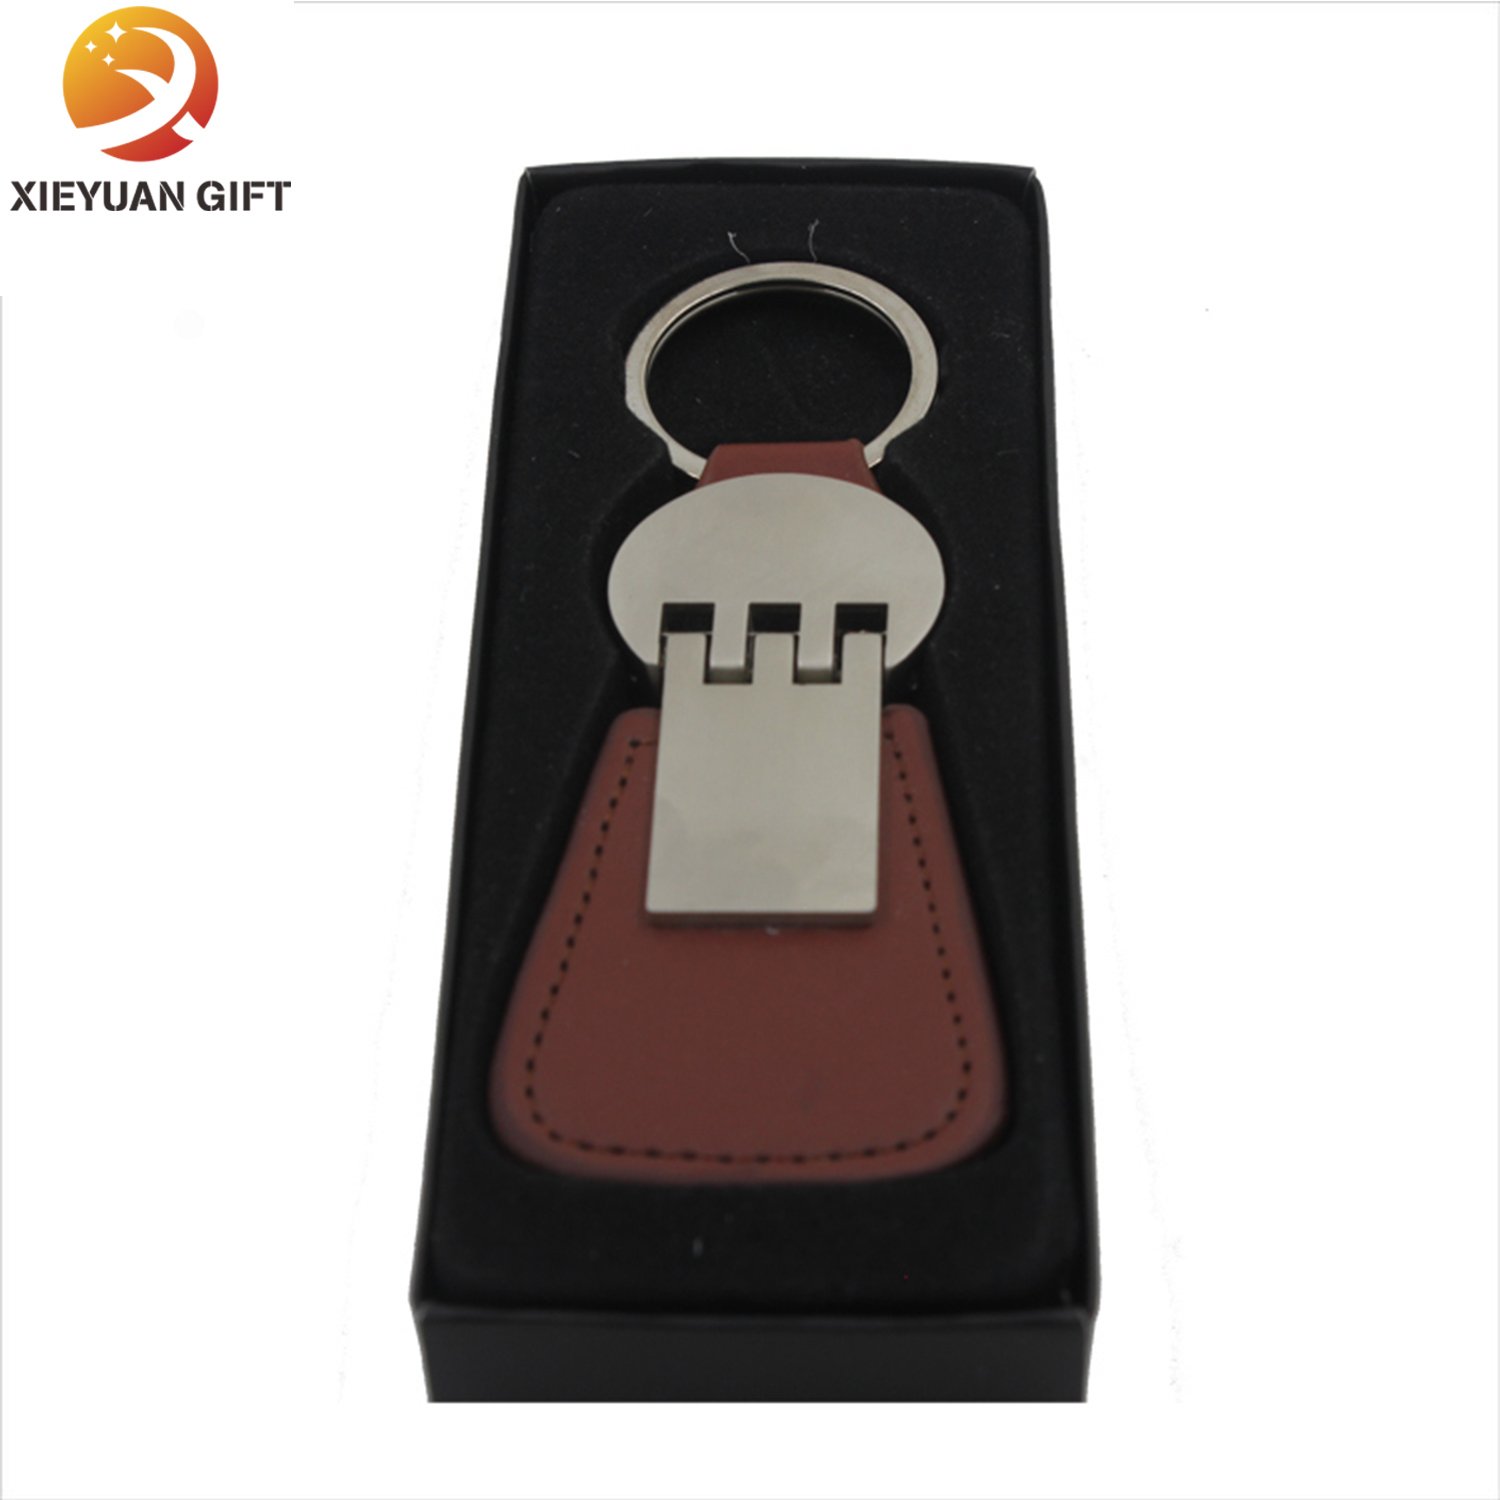 China Wholesale Key Holders Cheap for Gifts